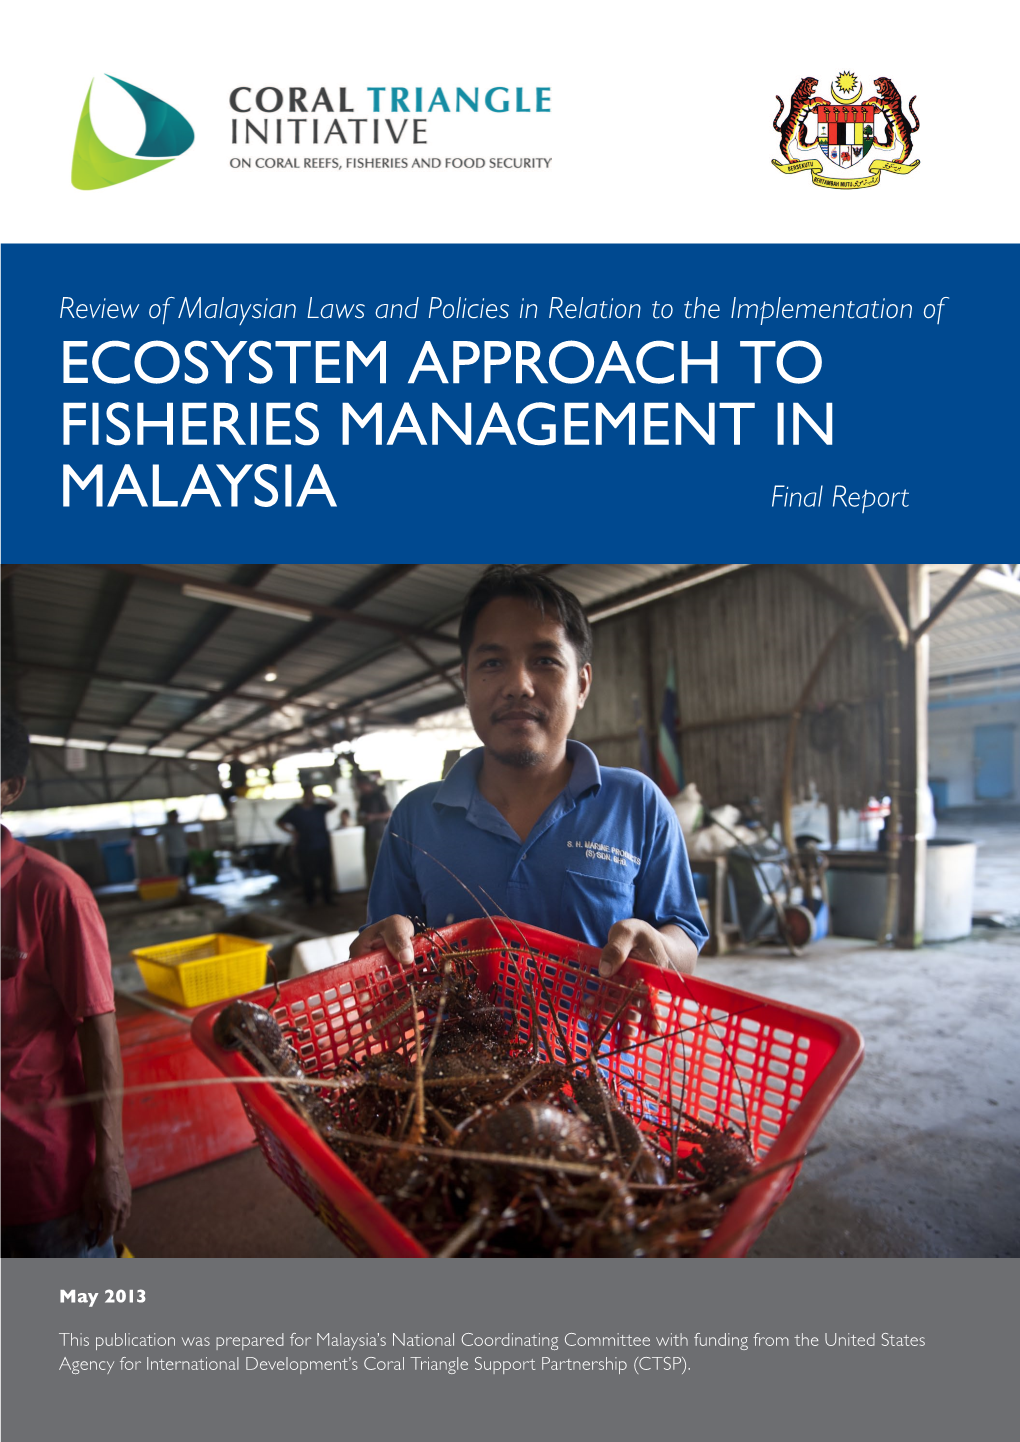 Ecosystem Approach to Fisheries Management in Malaysia Final Report